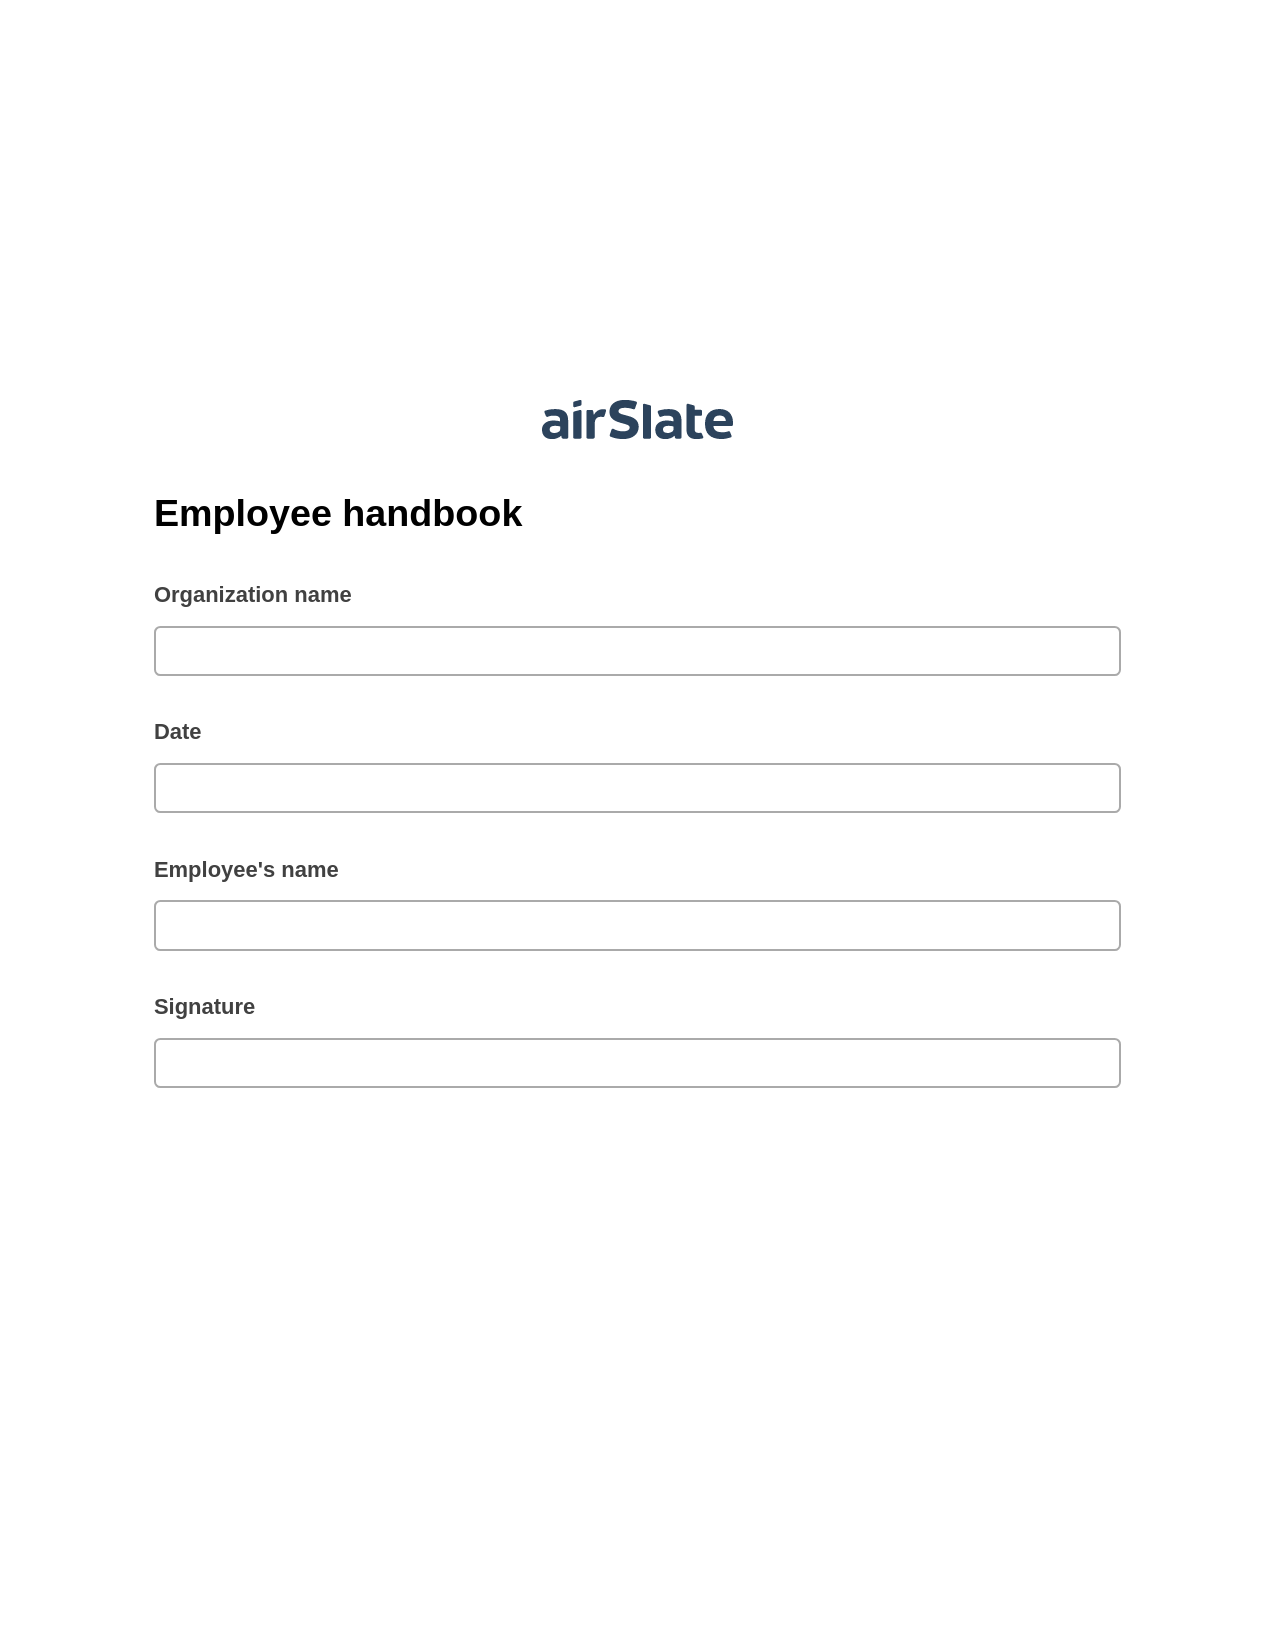 Employee handbook Pre-fill from Google Sheets Bot, Create slate addon, Export to NetSuite Record Bot